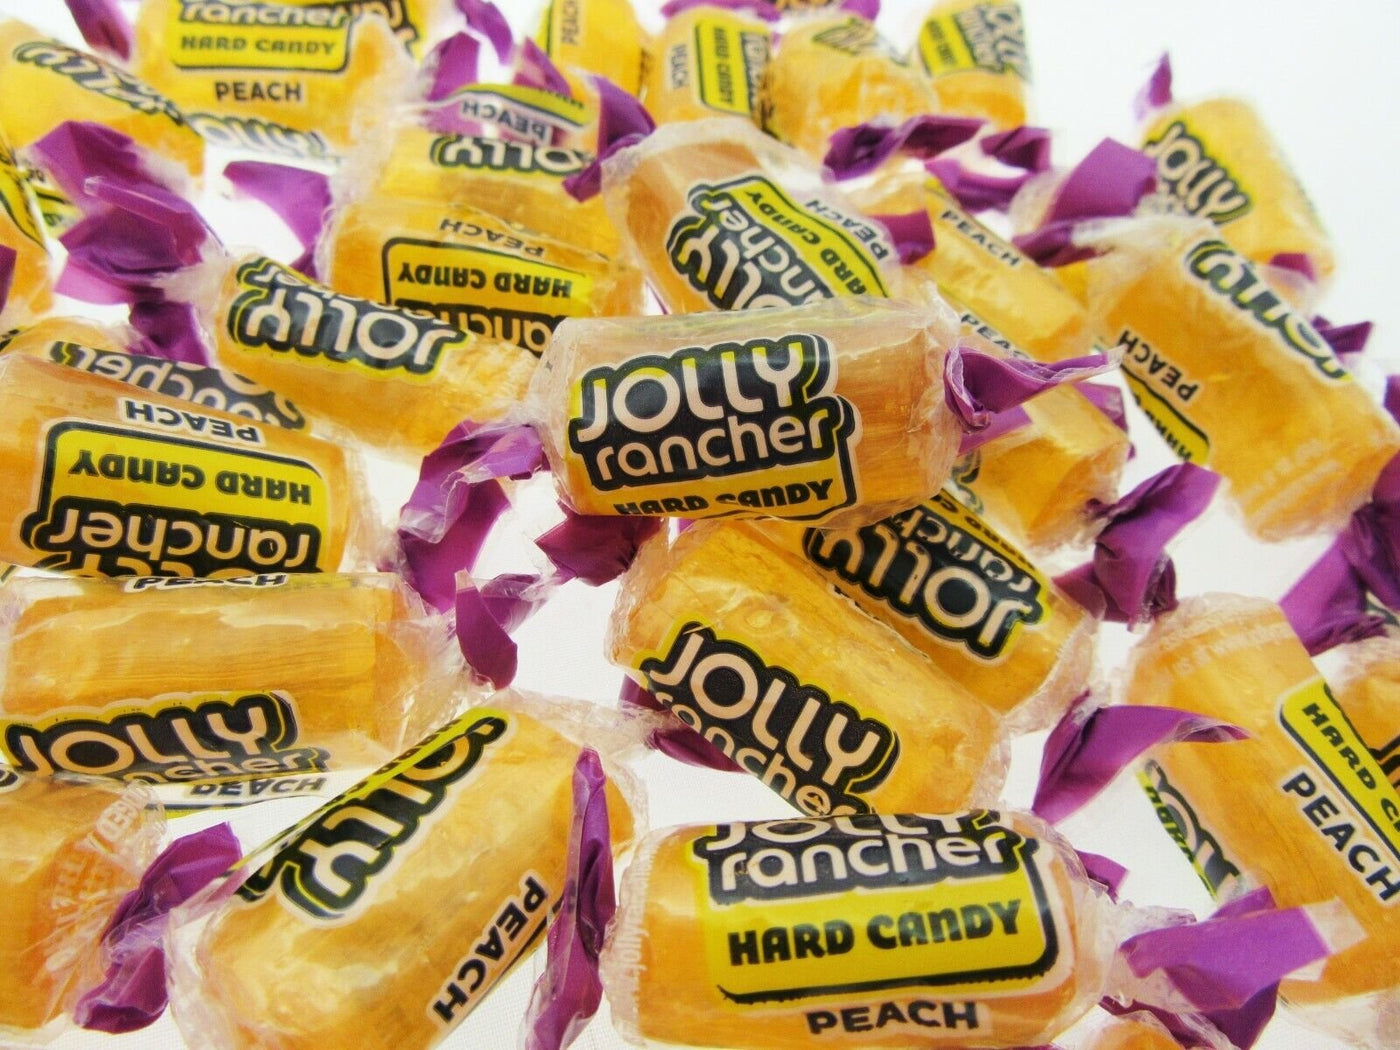 Jolly Rancher PEACH - 8oz Hard candy candies Half Pound Sweets ~ NEW FLAVOR